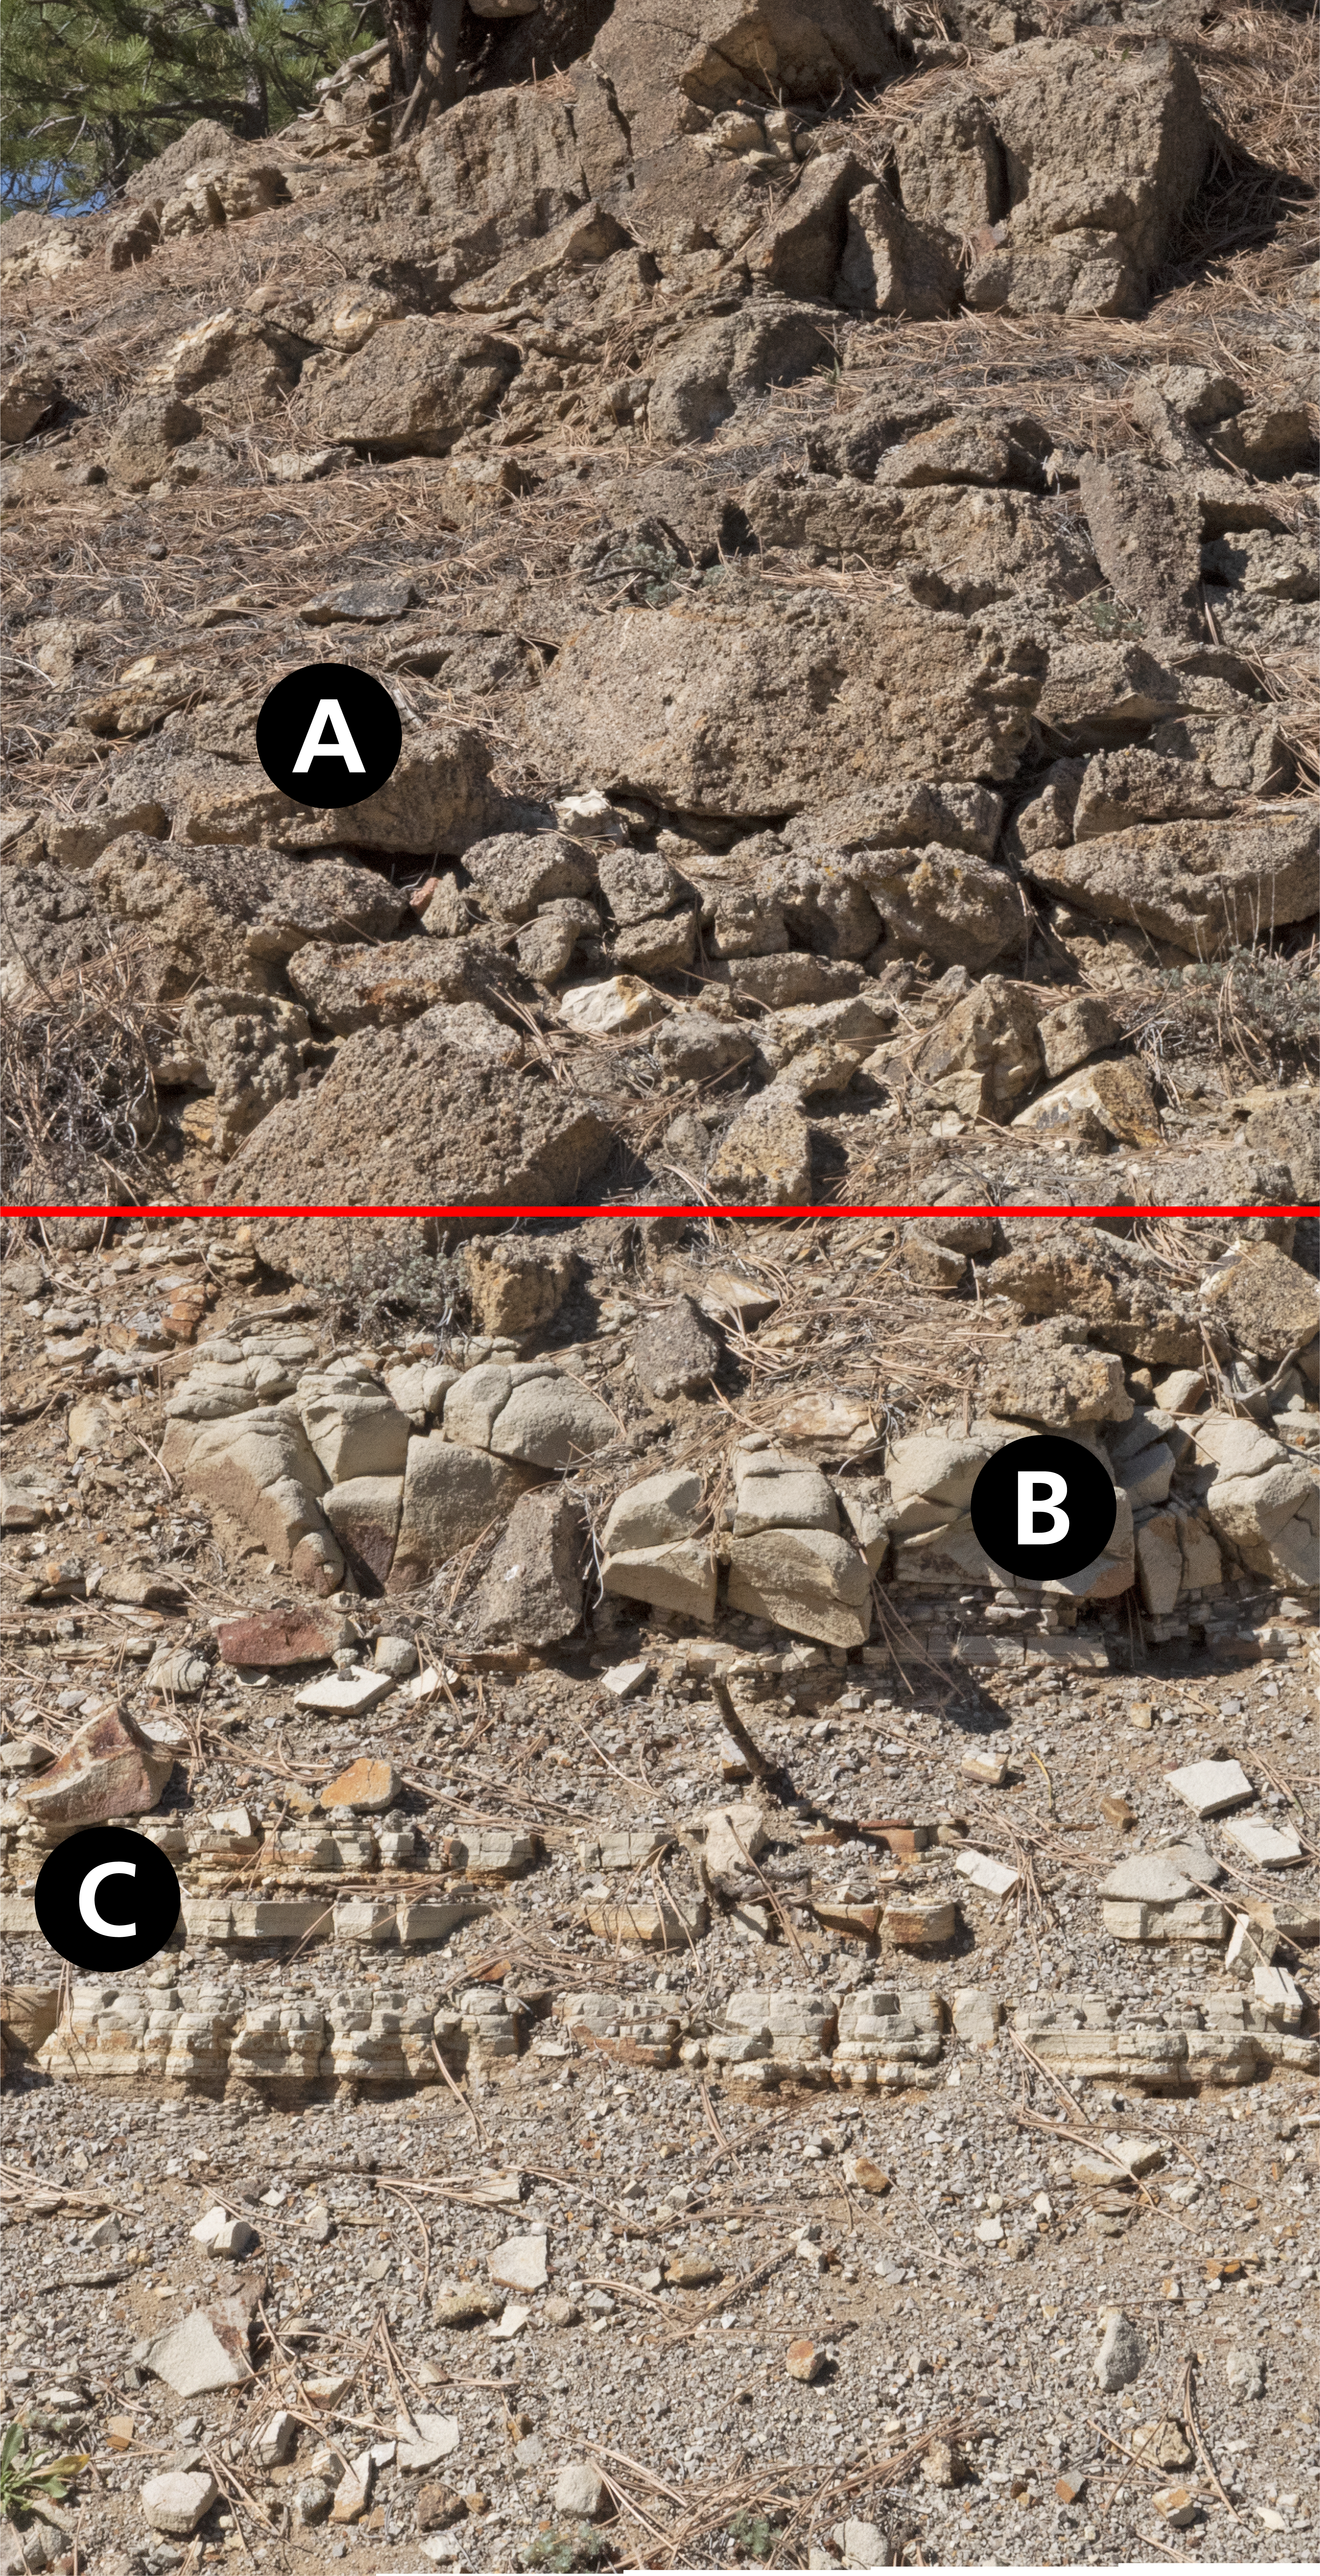 A close up of a rock outcrop with conglomerate on top and shale on the bottom. The two rock units are divided by a red line. The letters A, B, and C are in black circles located on the rocks.